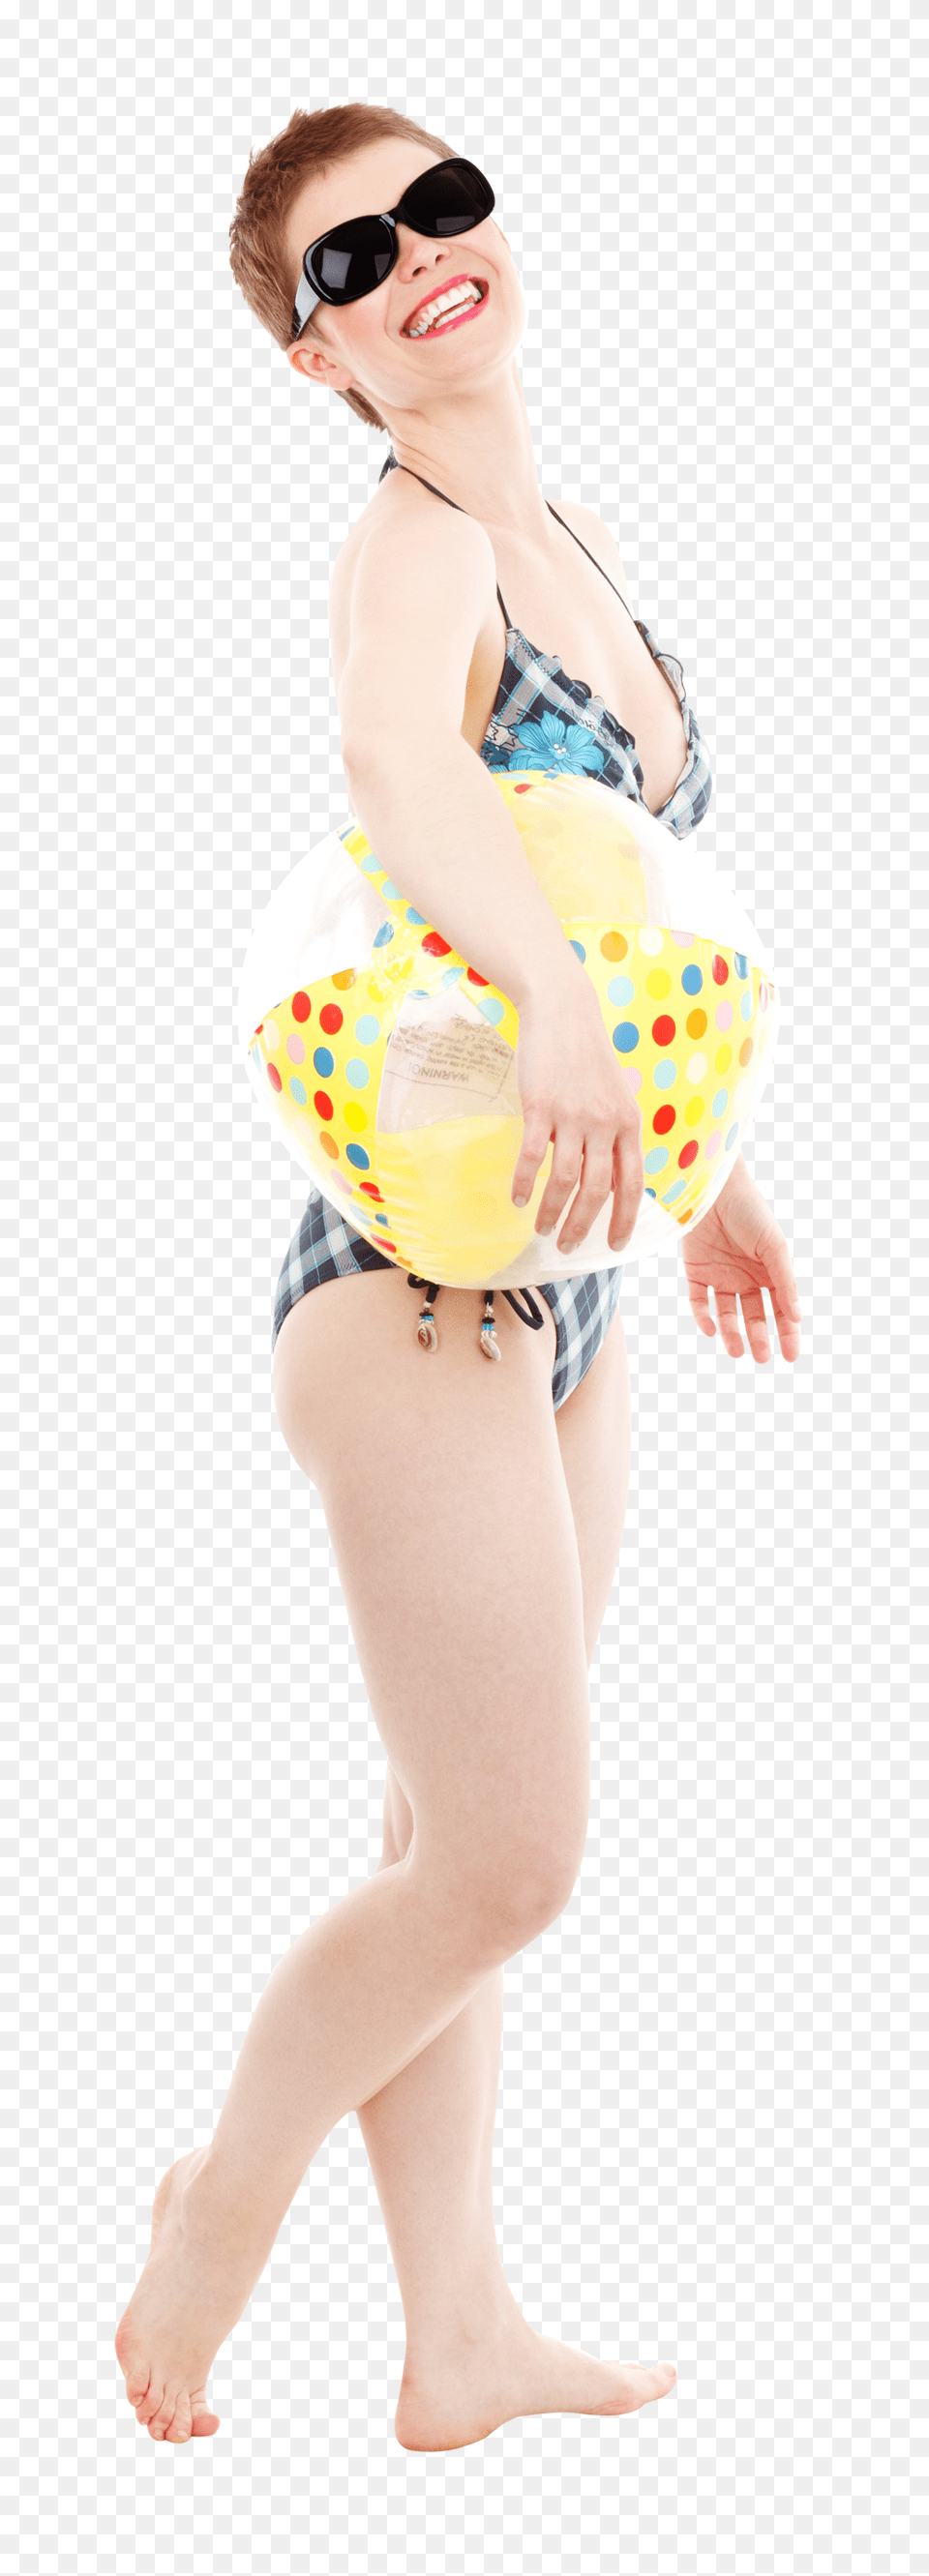 Pngpix Com Happy Sexy Woman With Beach Ball Image, Accessories, Swimwear, Sunglasses, Clothing Free Png